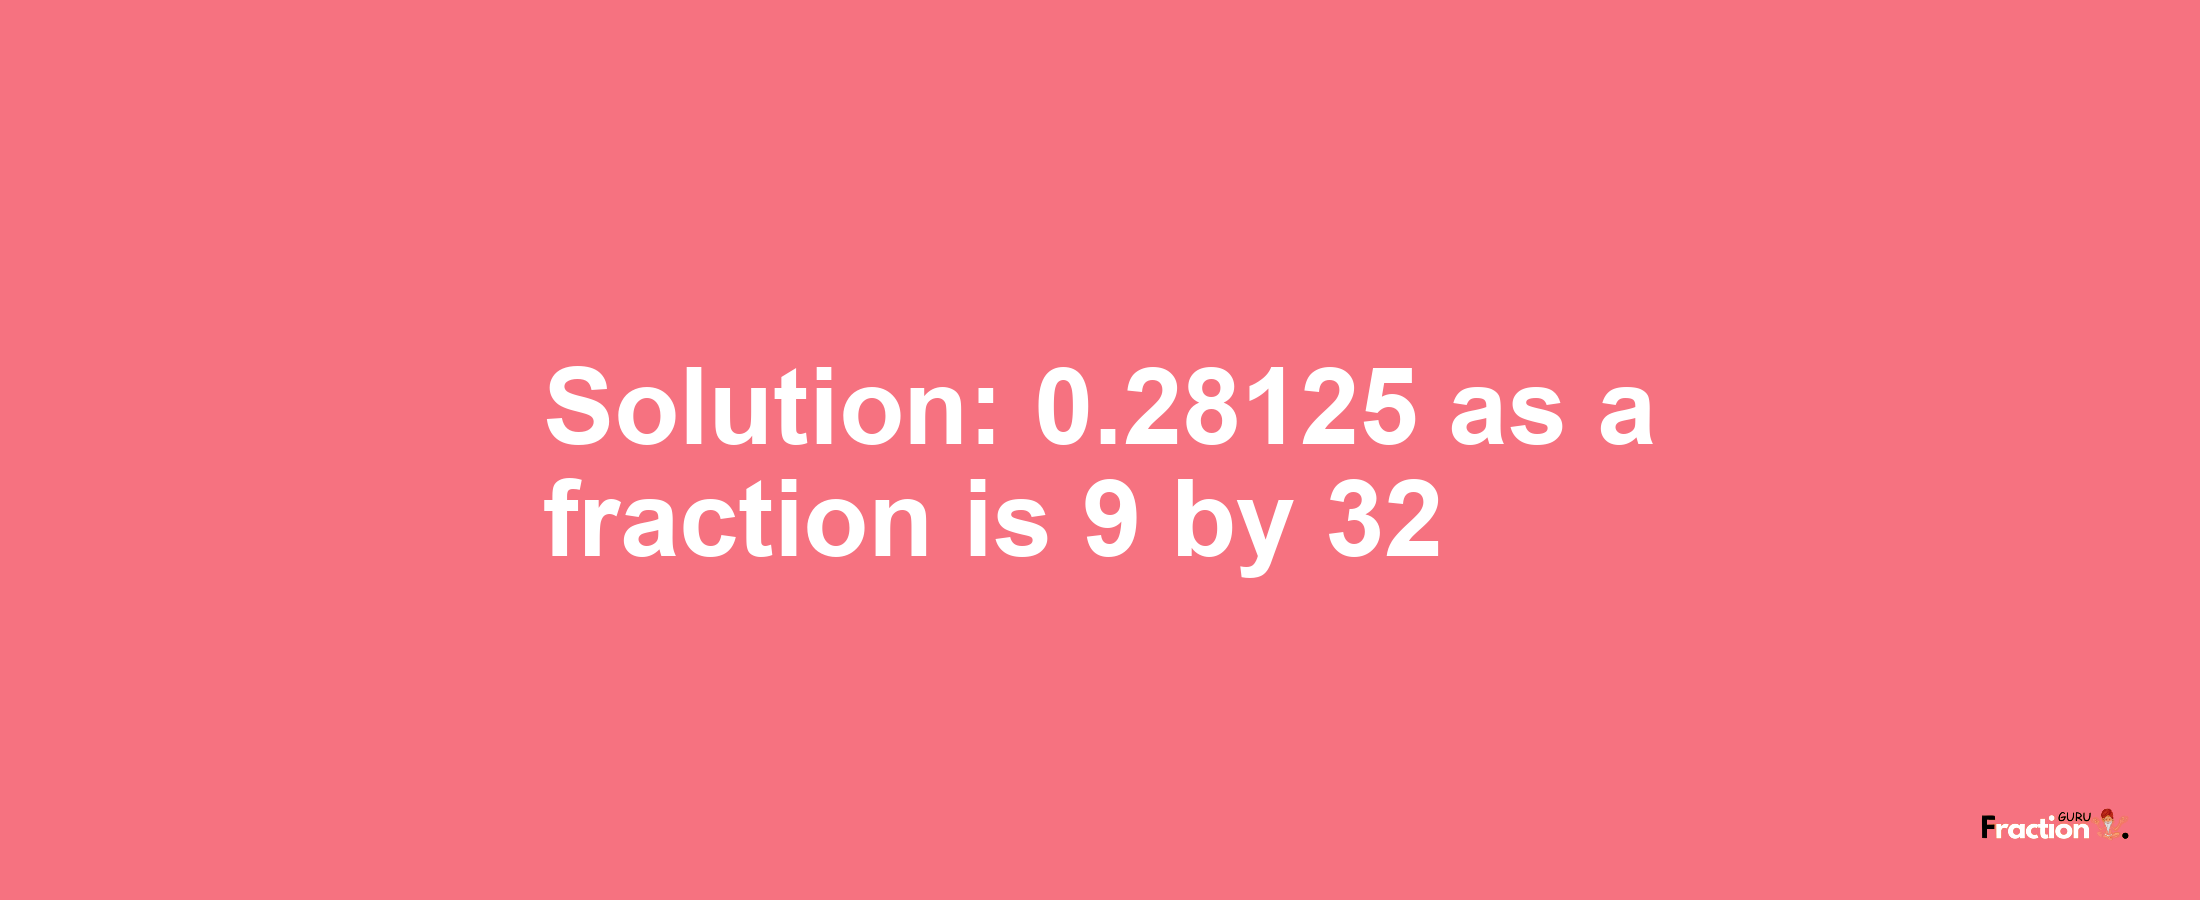 Solution:0.28125 as a fraction is 9/32